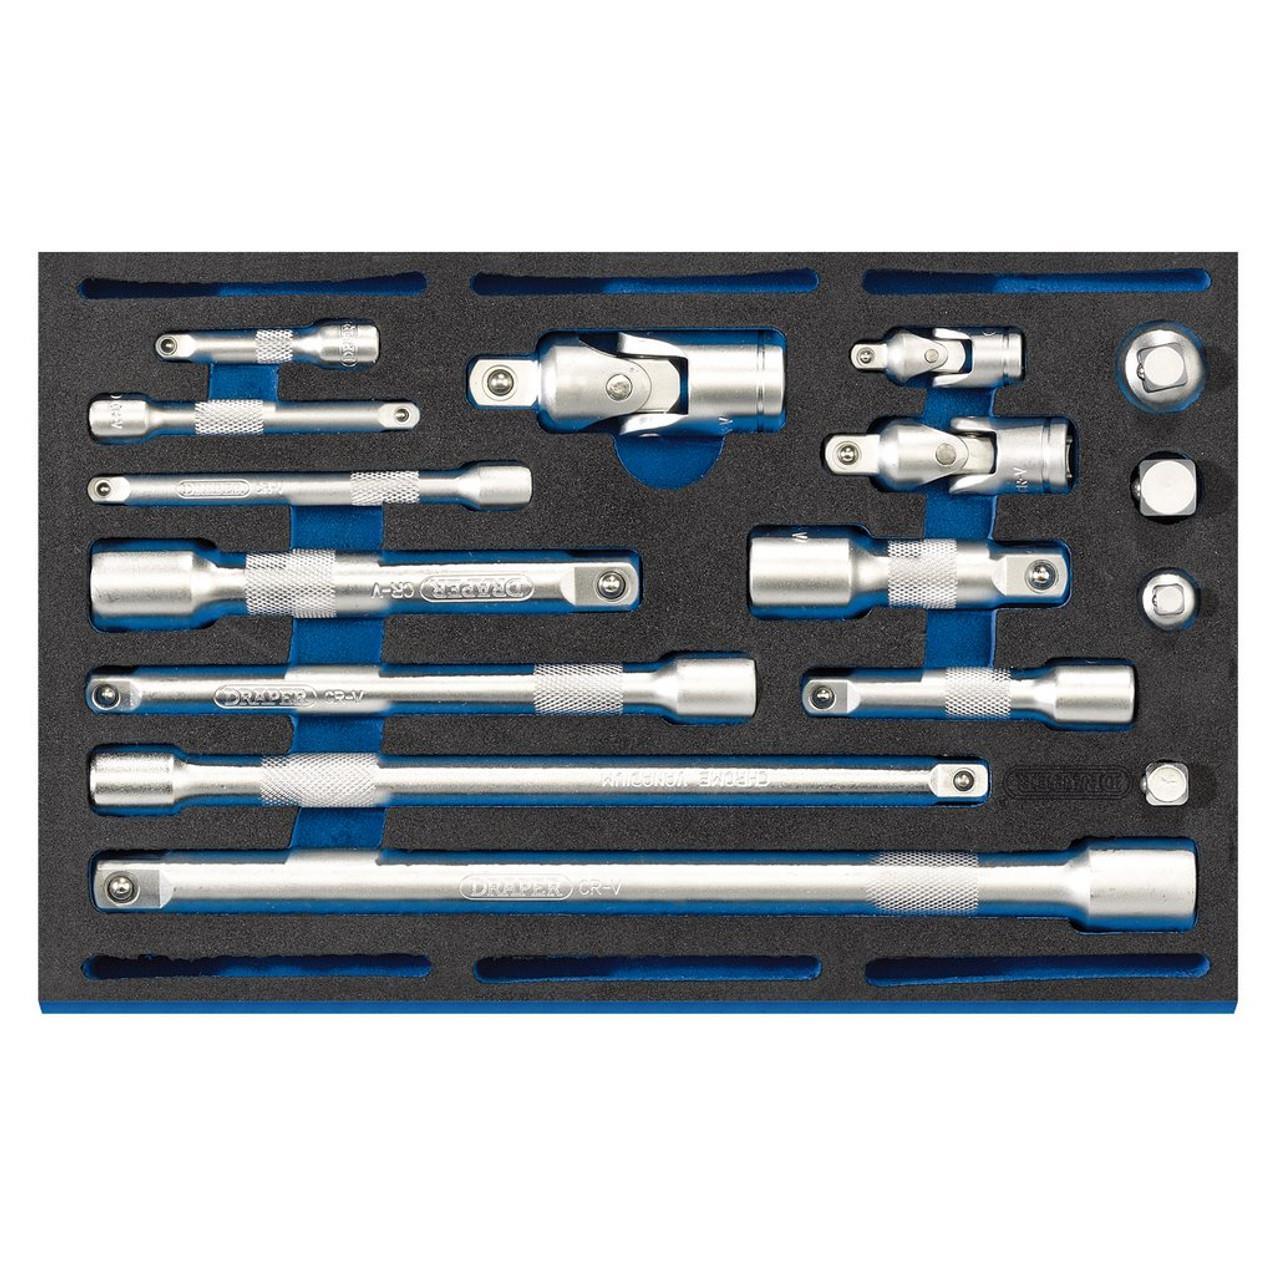 Draper 16 Piece 1/4, 3/8, 1/2" Extension Bar, Universal Joints and Socket Convertor Set in Eva Insert Tray 63530 - Tools 2U Direct SW